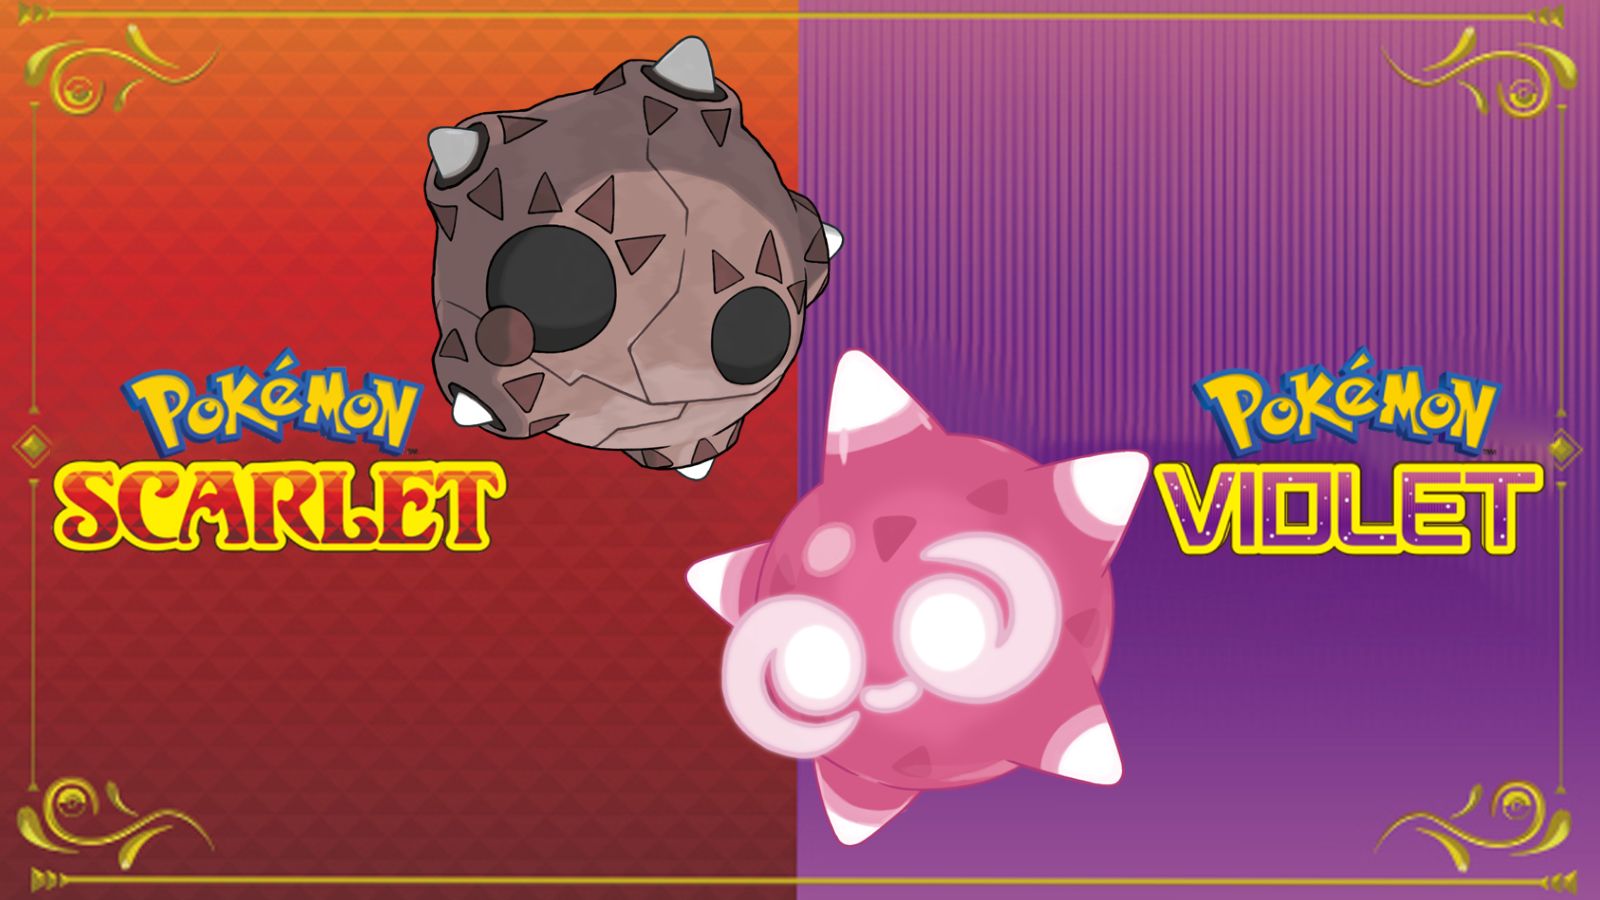 Pokemon Scarlet and Violet Rumors Make for a Unique Type Triangle